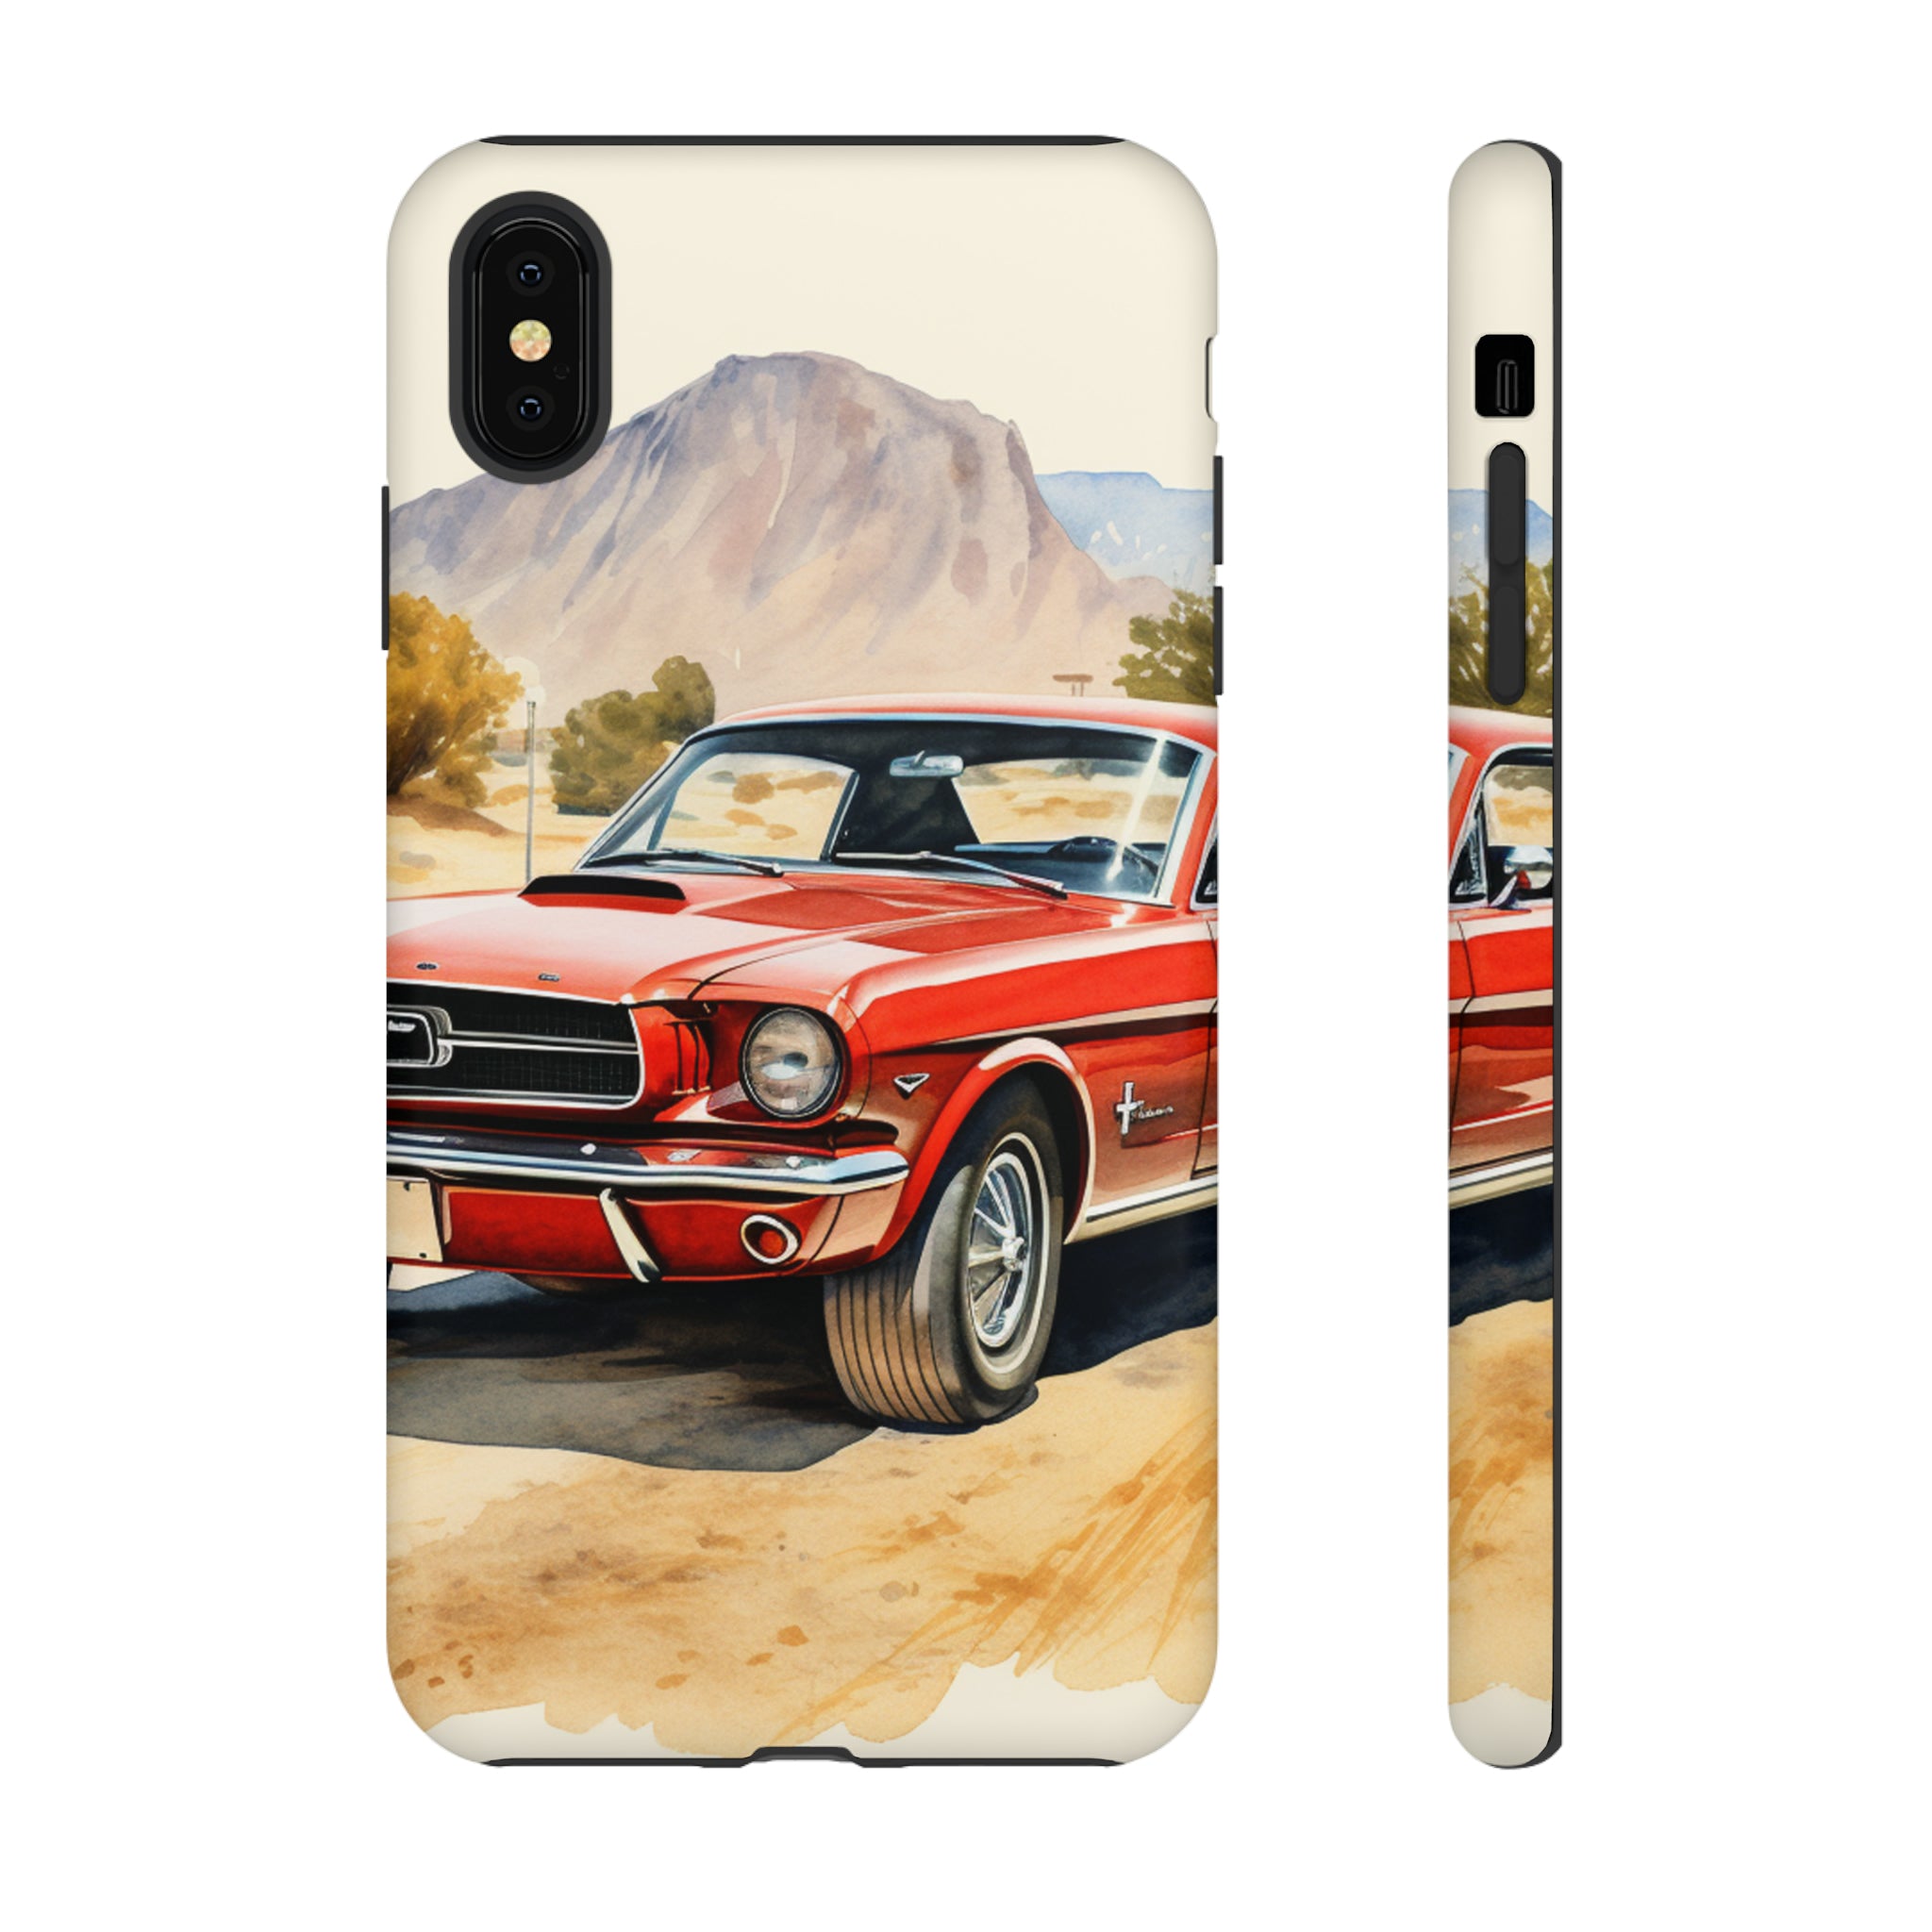 Carz Lover - Phone Cases